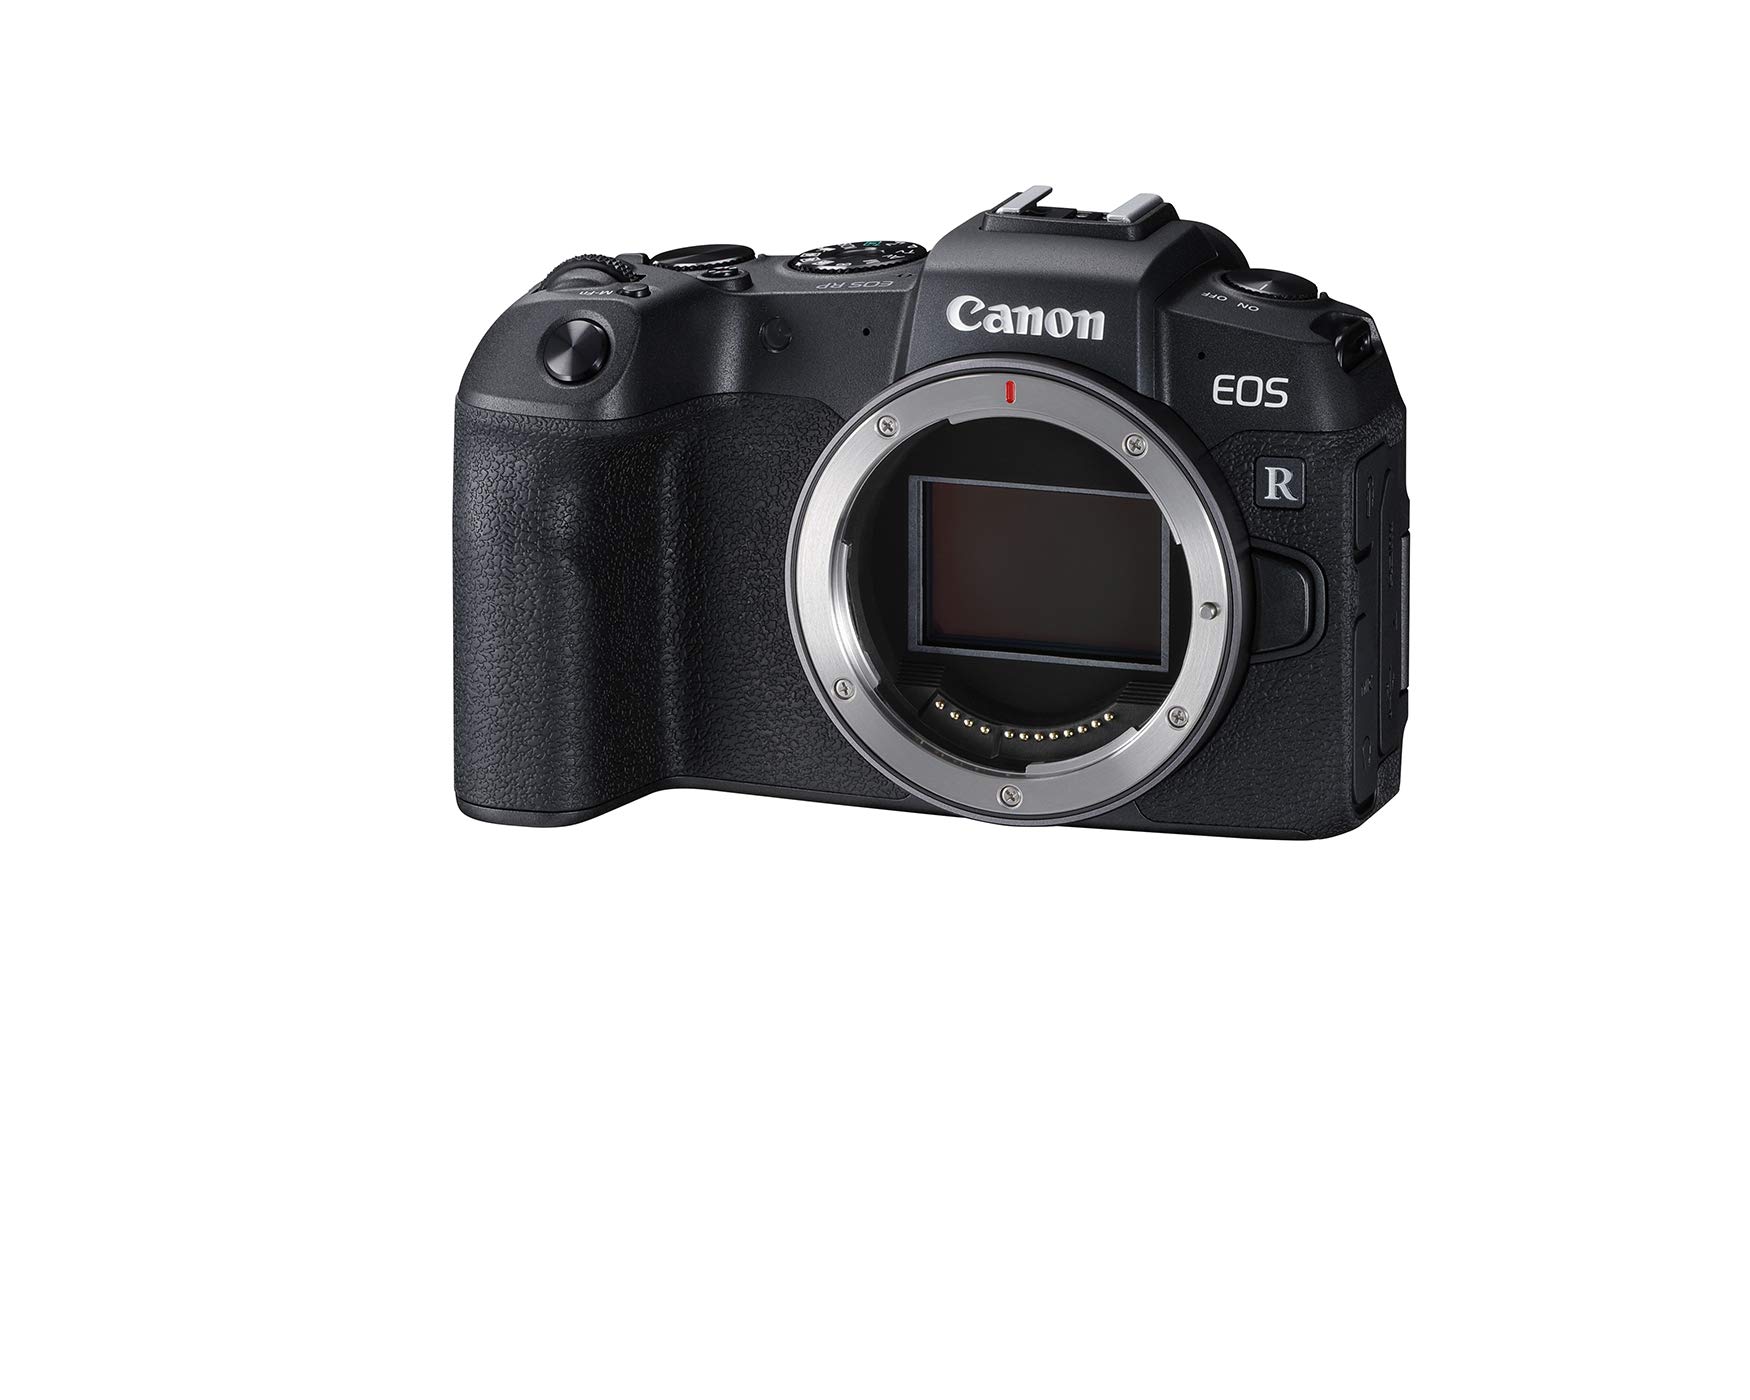 Canon EOS RP Full Frame Mirrorless Vlogging Portable Digital Camera with 26.2MP Full-Frame CMOS Sensor, Wi-Fi, Bluetooth, 4K Video Recording and 3.0” Vari-Angle Touch LCD Screen, Body, Black,